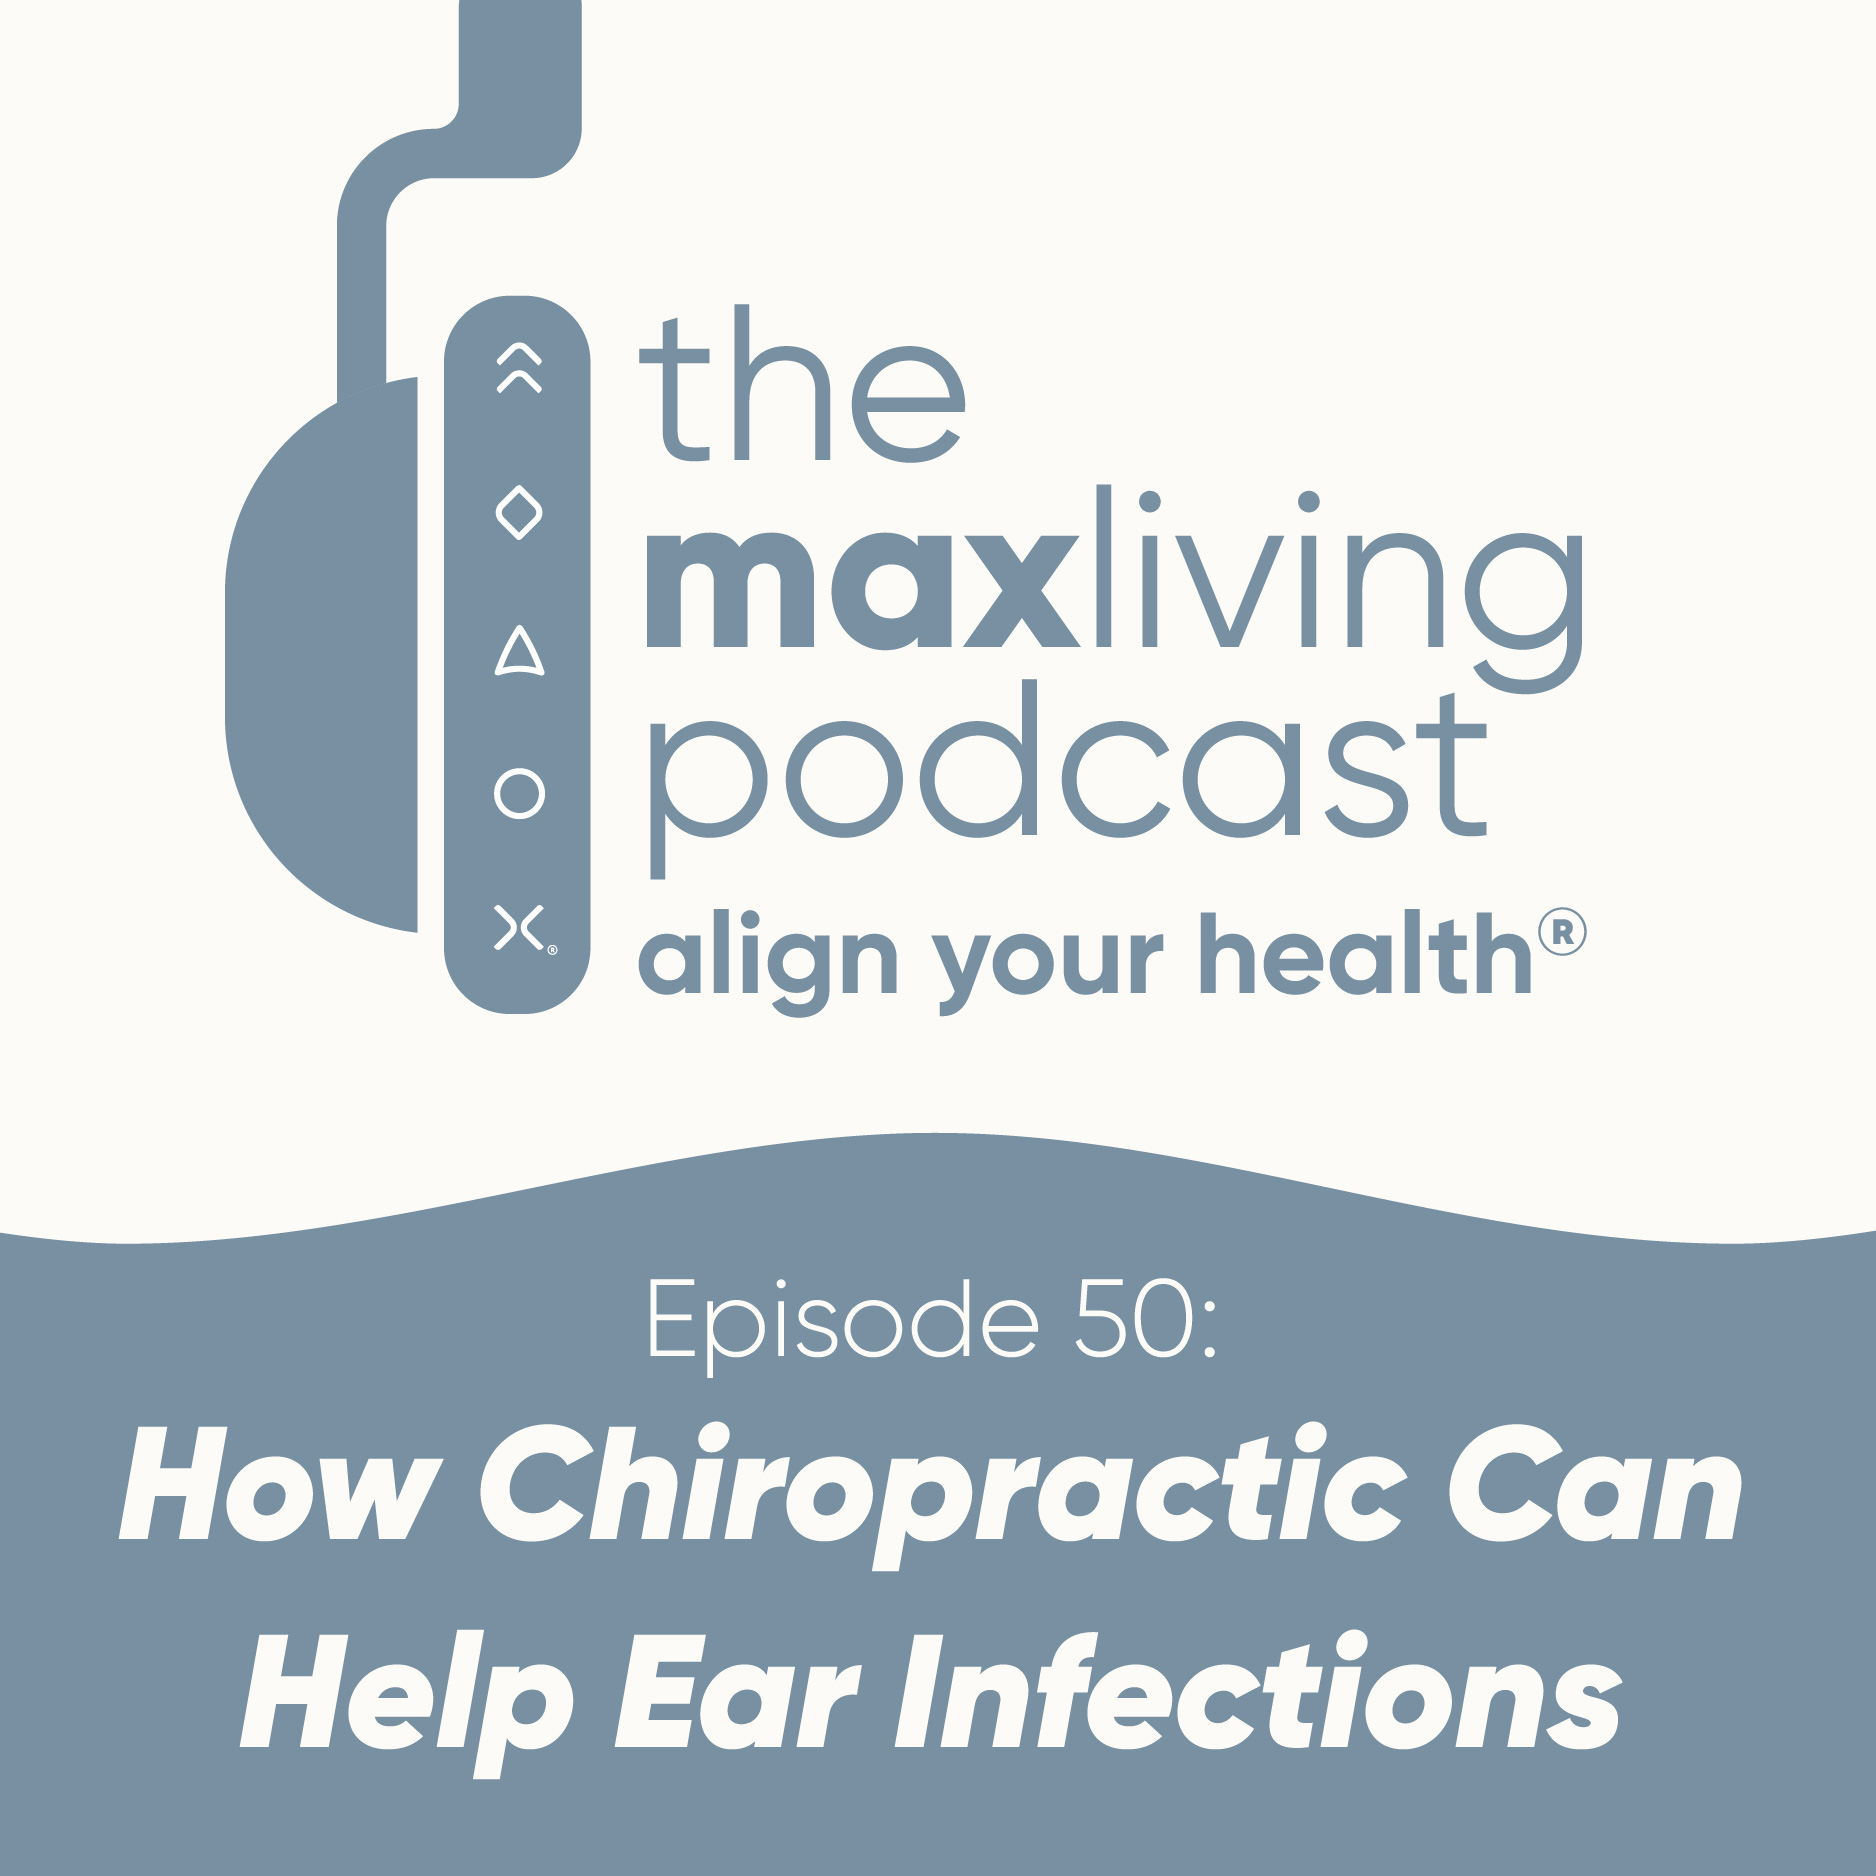 How Chiropractic Can Help Ear Infections